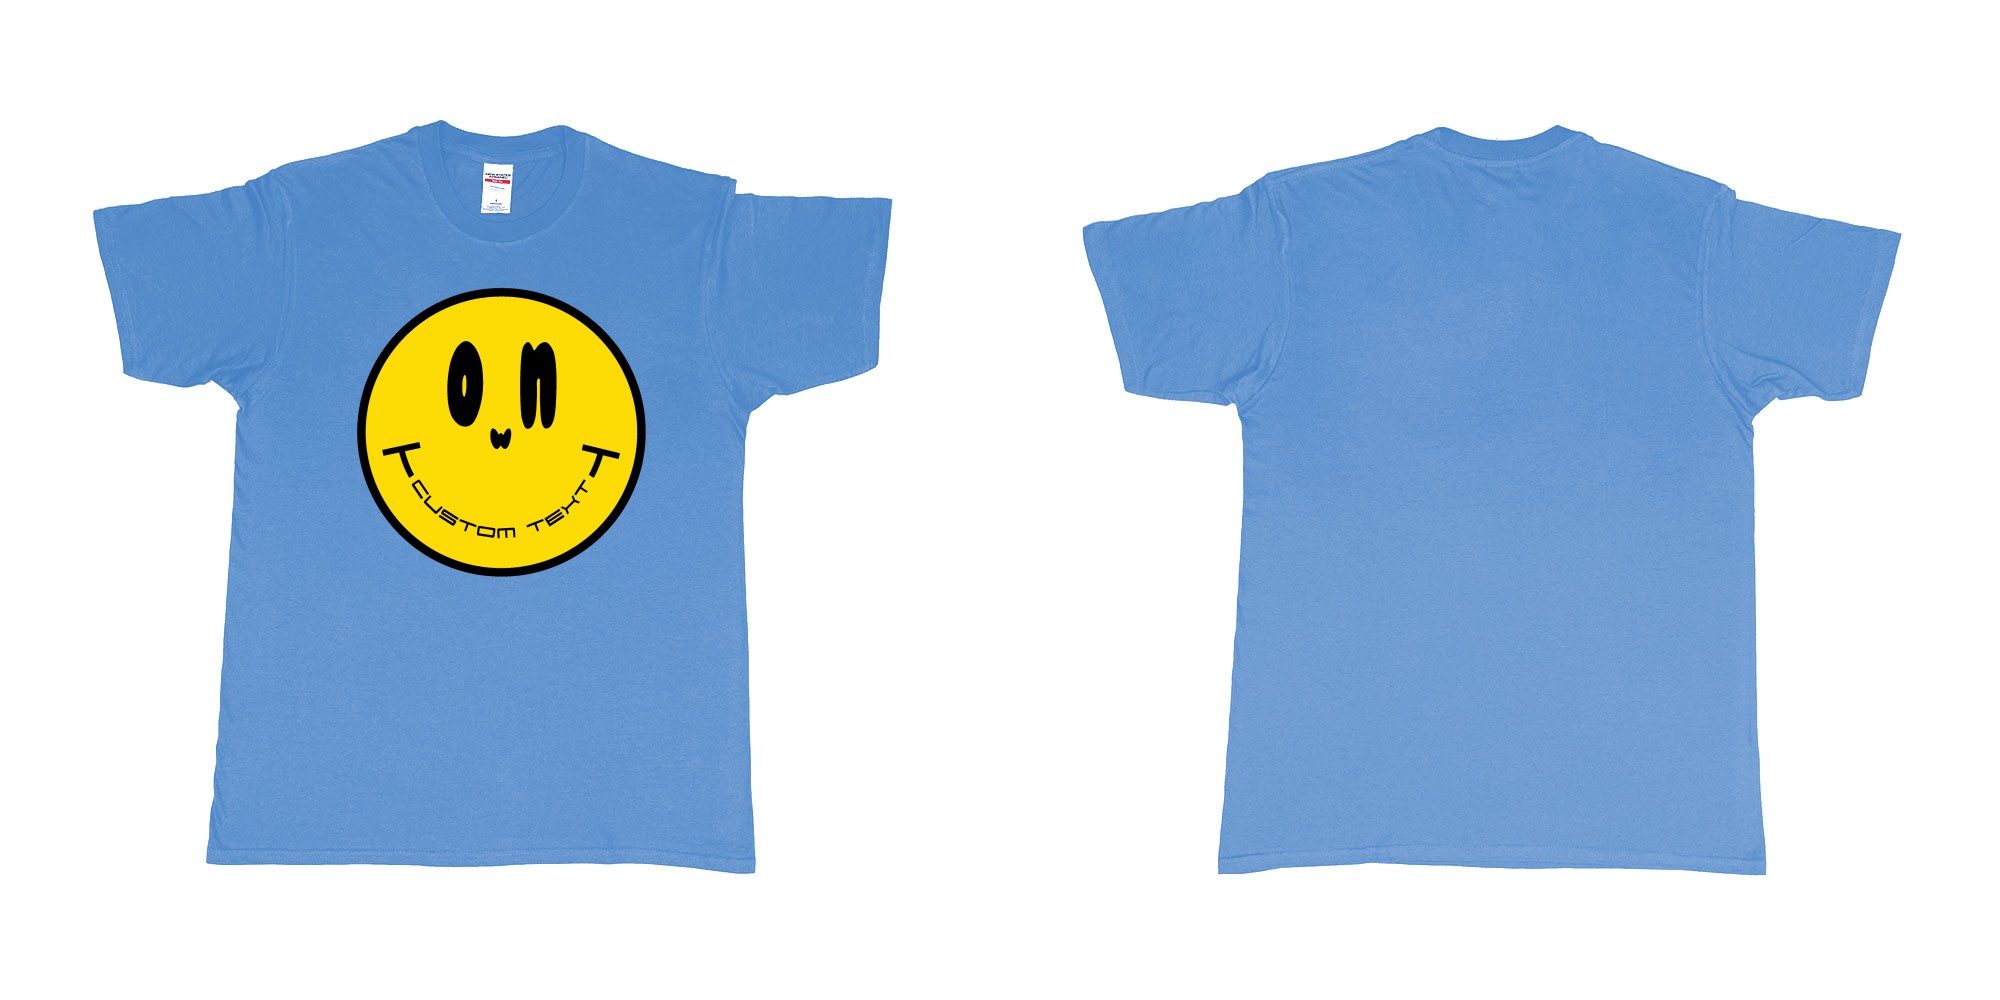 Custom tshirt design smiley face emoji custom text in fabric color carolina-blue choice your own text made in Bali by The Pirate Way